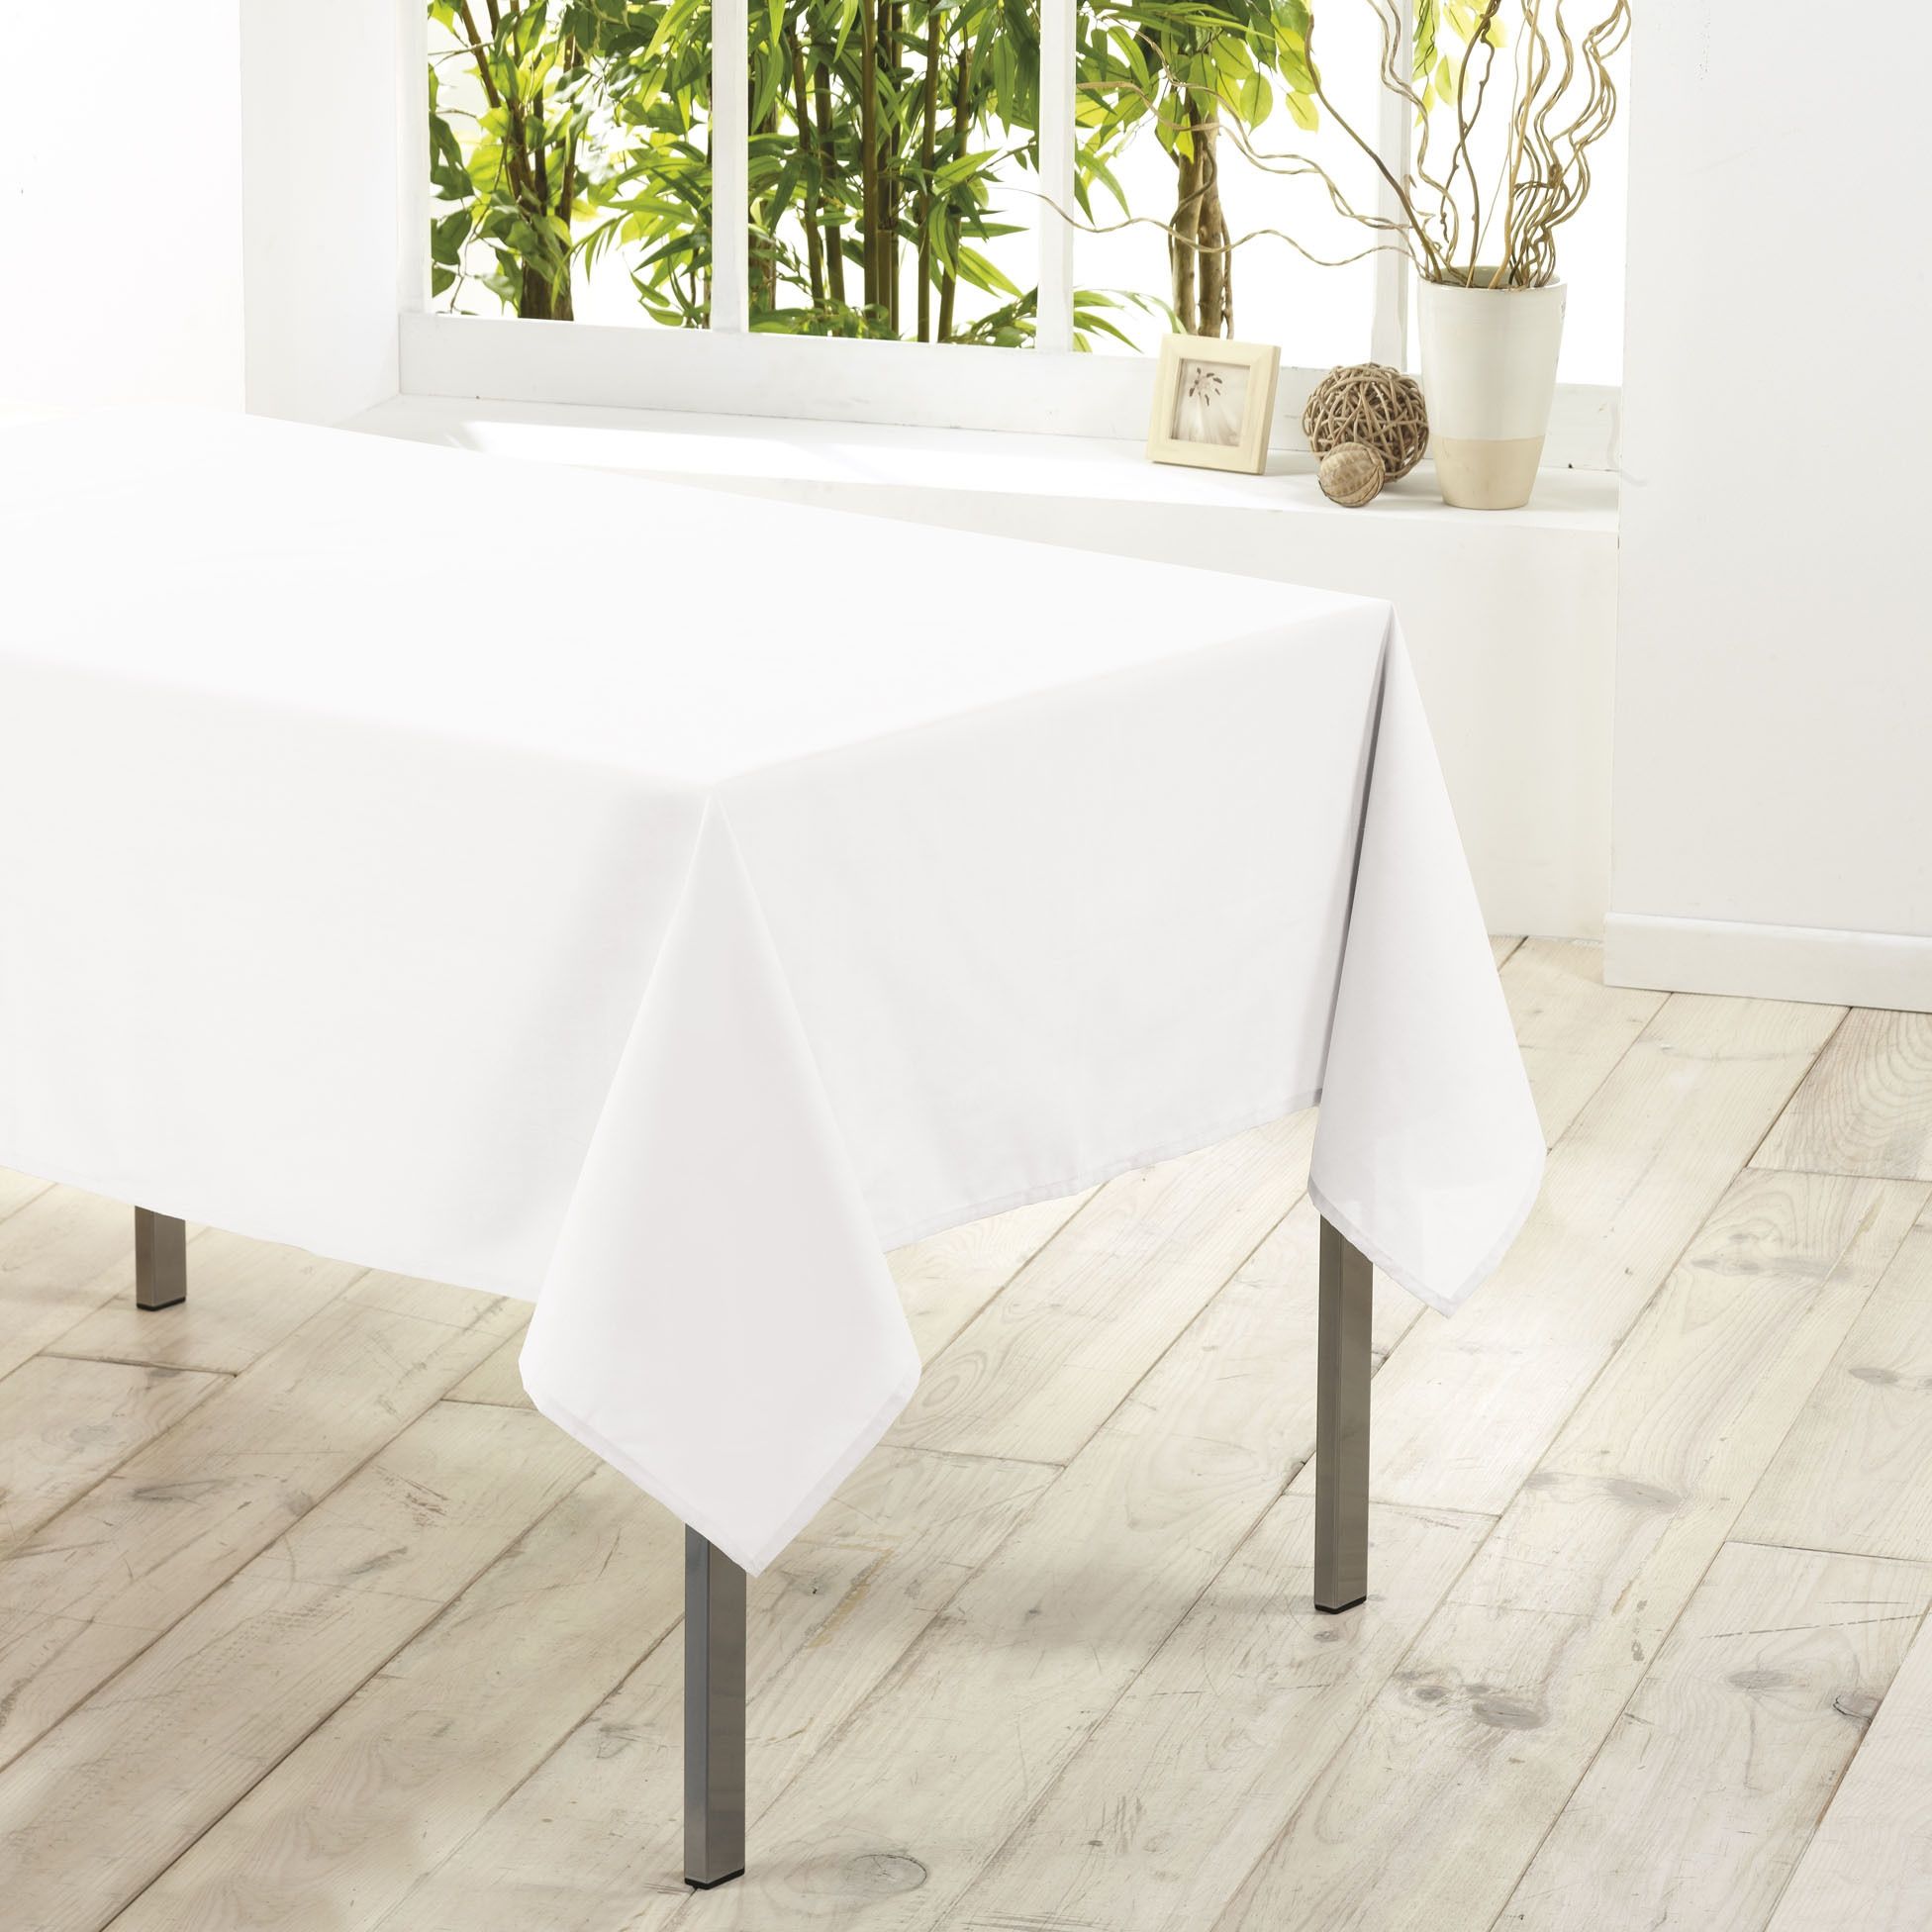 Nappe rectangle polyester blanche 140 x 200 cm